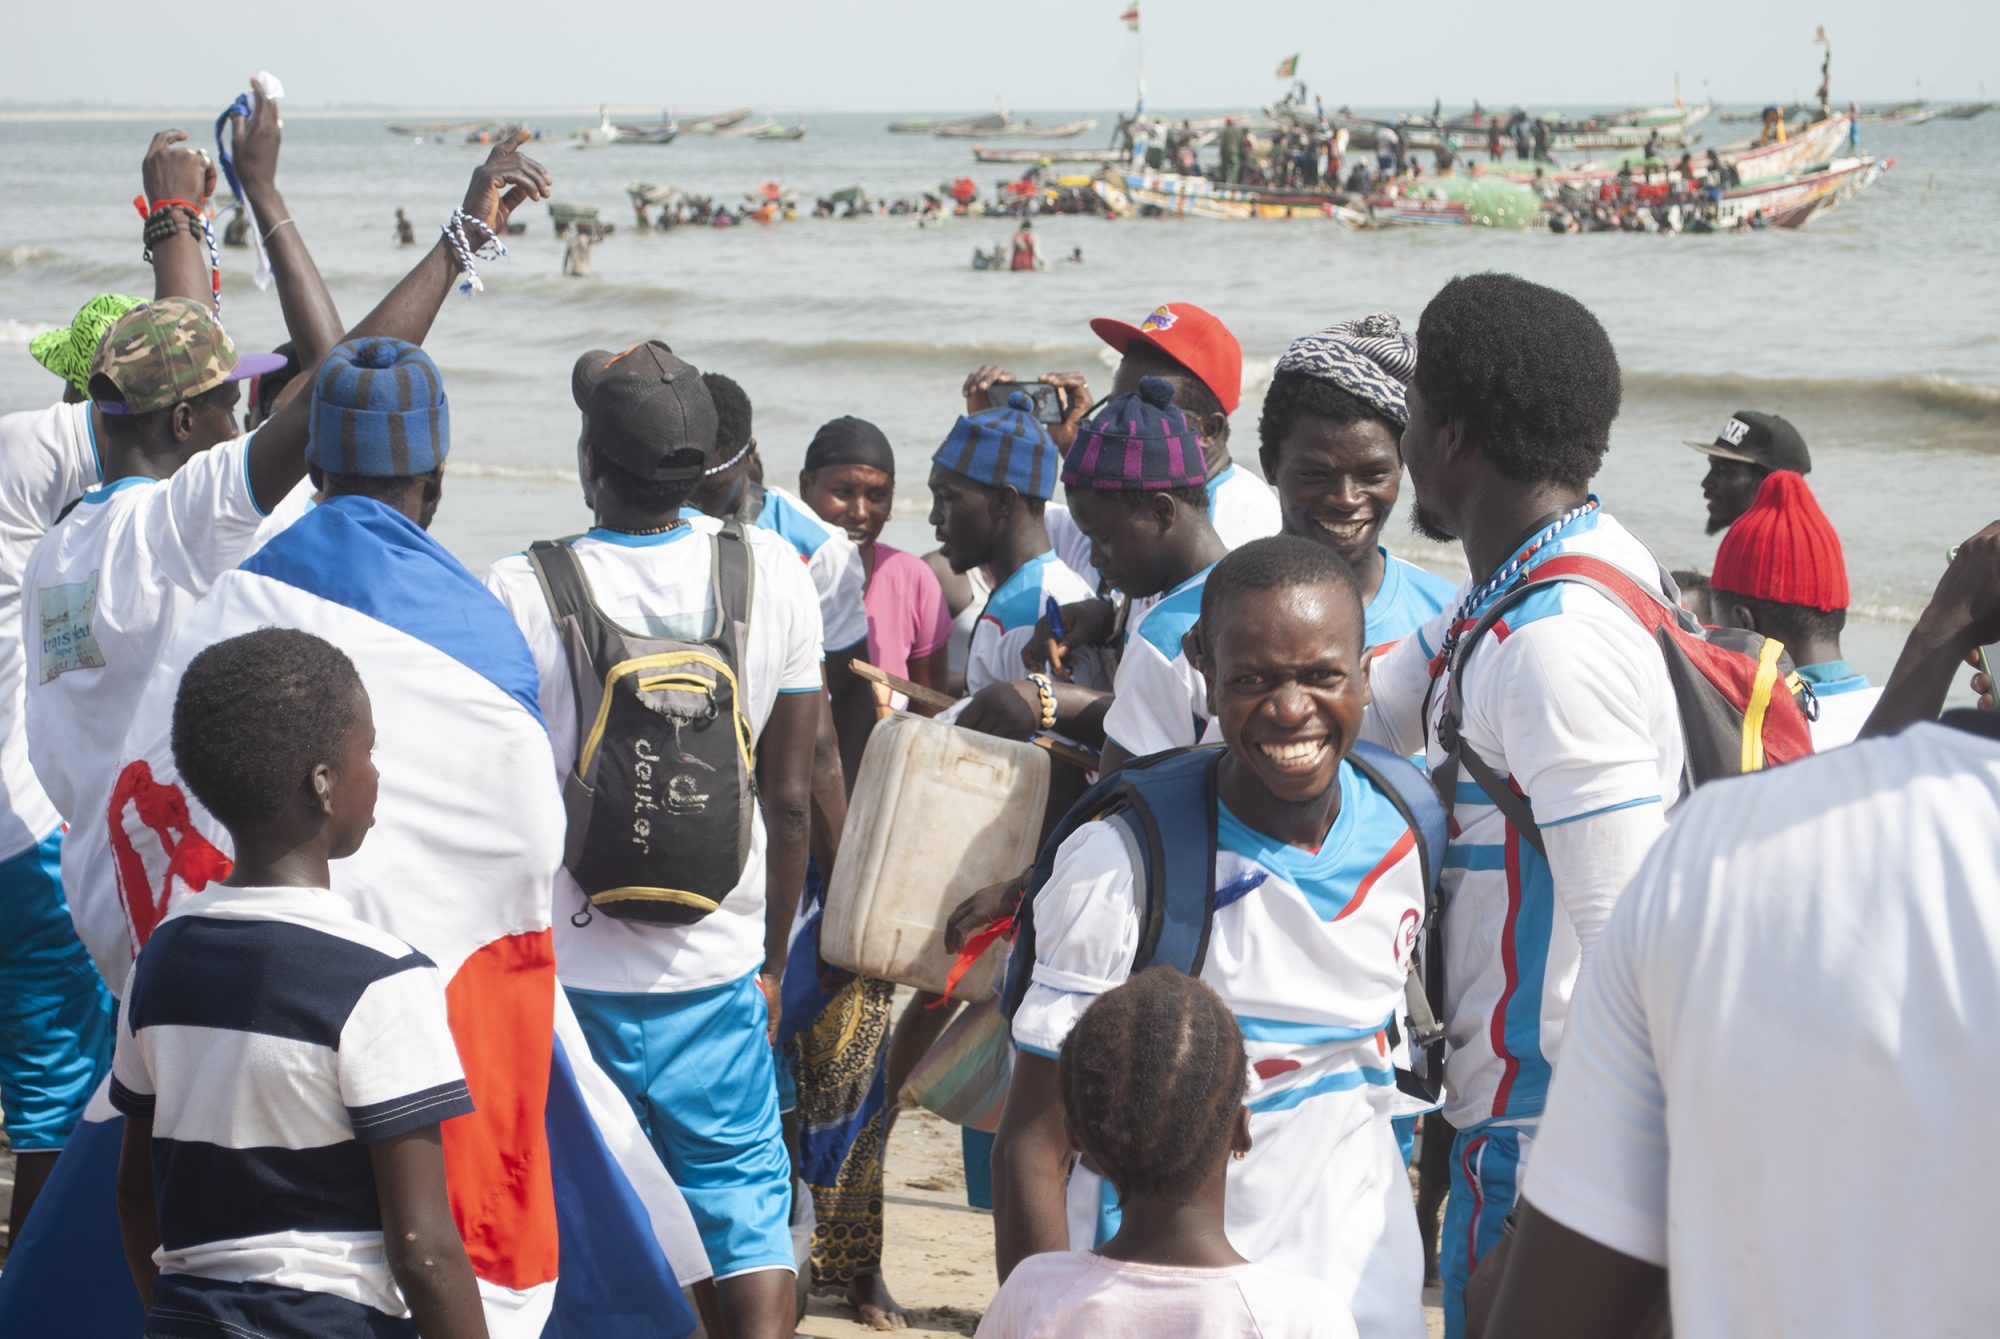 A group of Senegalese fishers celebrate on Gunjur beach in the Gambia. They have just completed their six-month contract to supply fish to the Golden Lead factory, and are now returning to Senegal. (Image: Mustapha Manneh / China Dialogue)